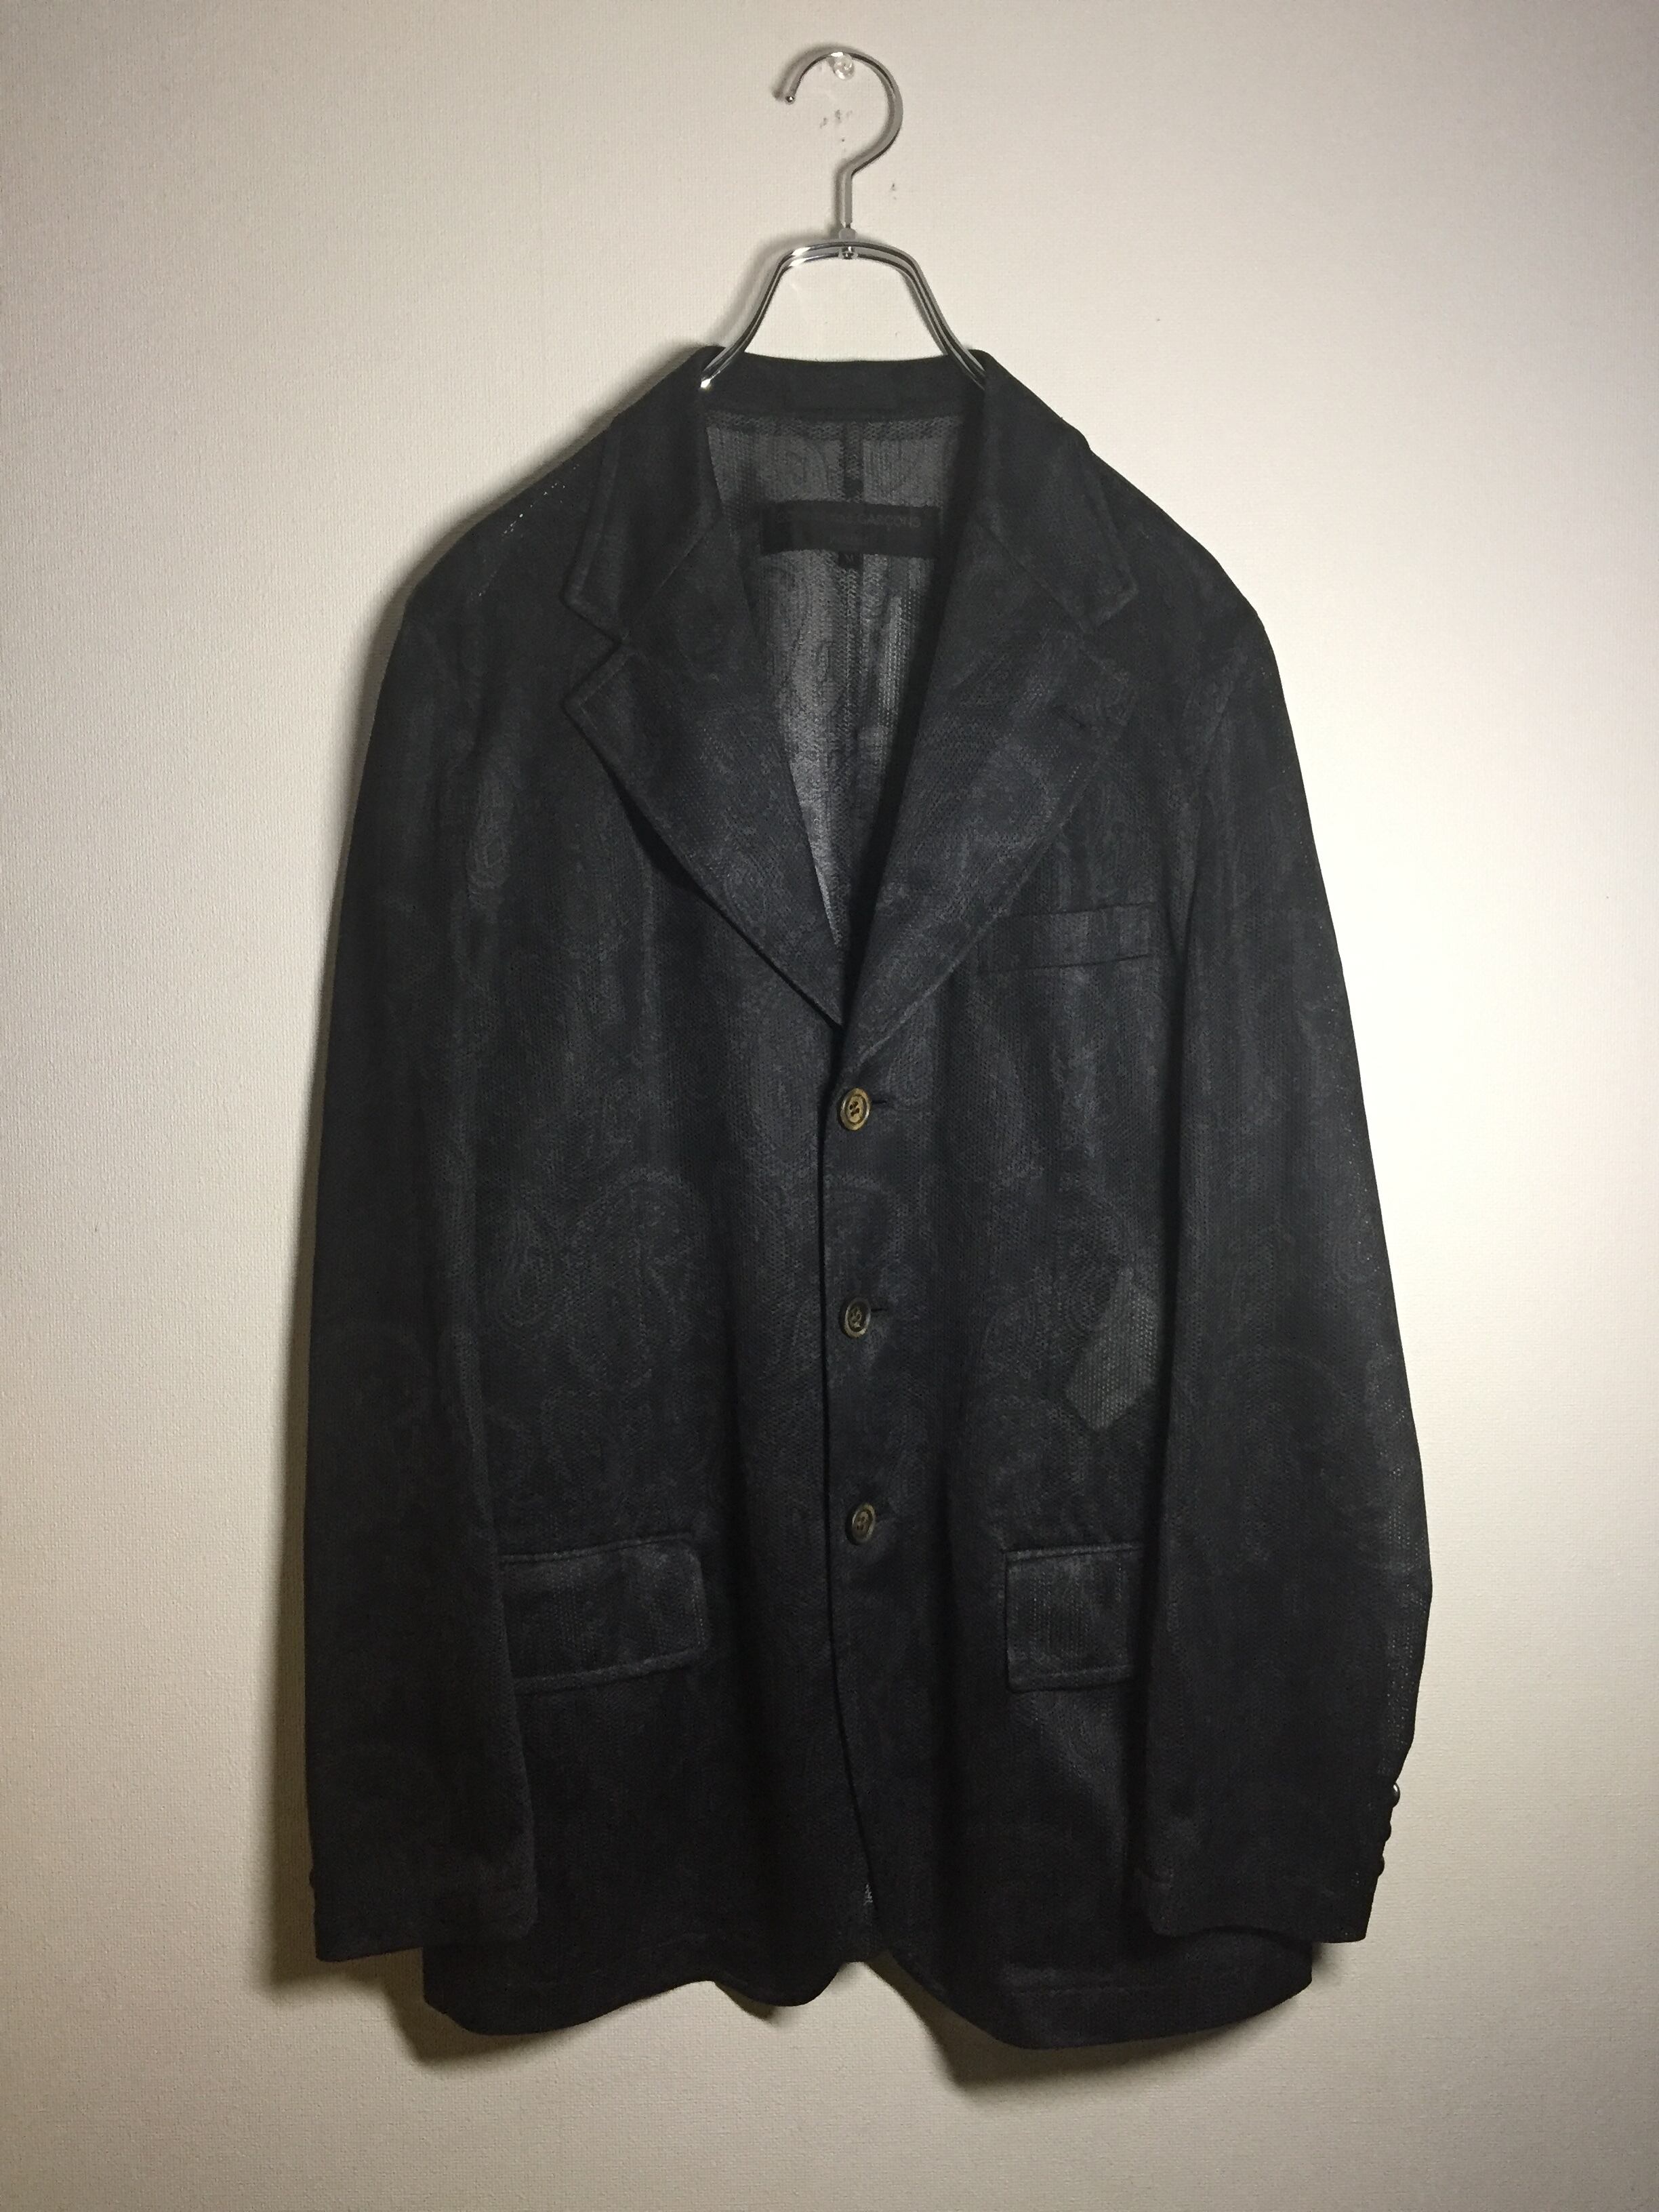 COMME des GARCONS HOMME 総柄 デザインジャケット ペイズリー柄 メッシュ素材 透け感